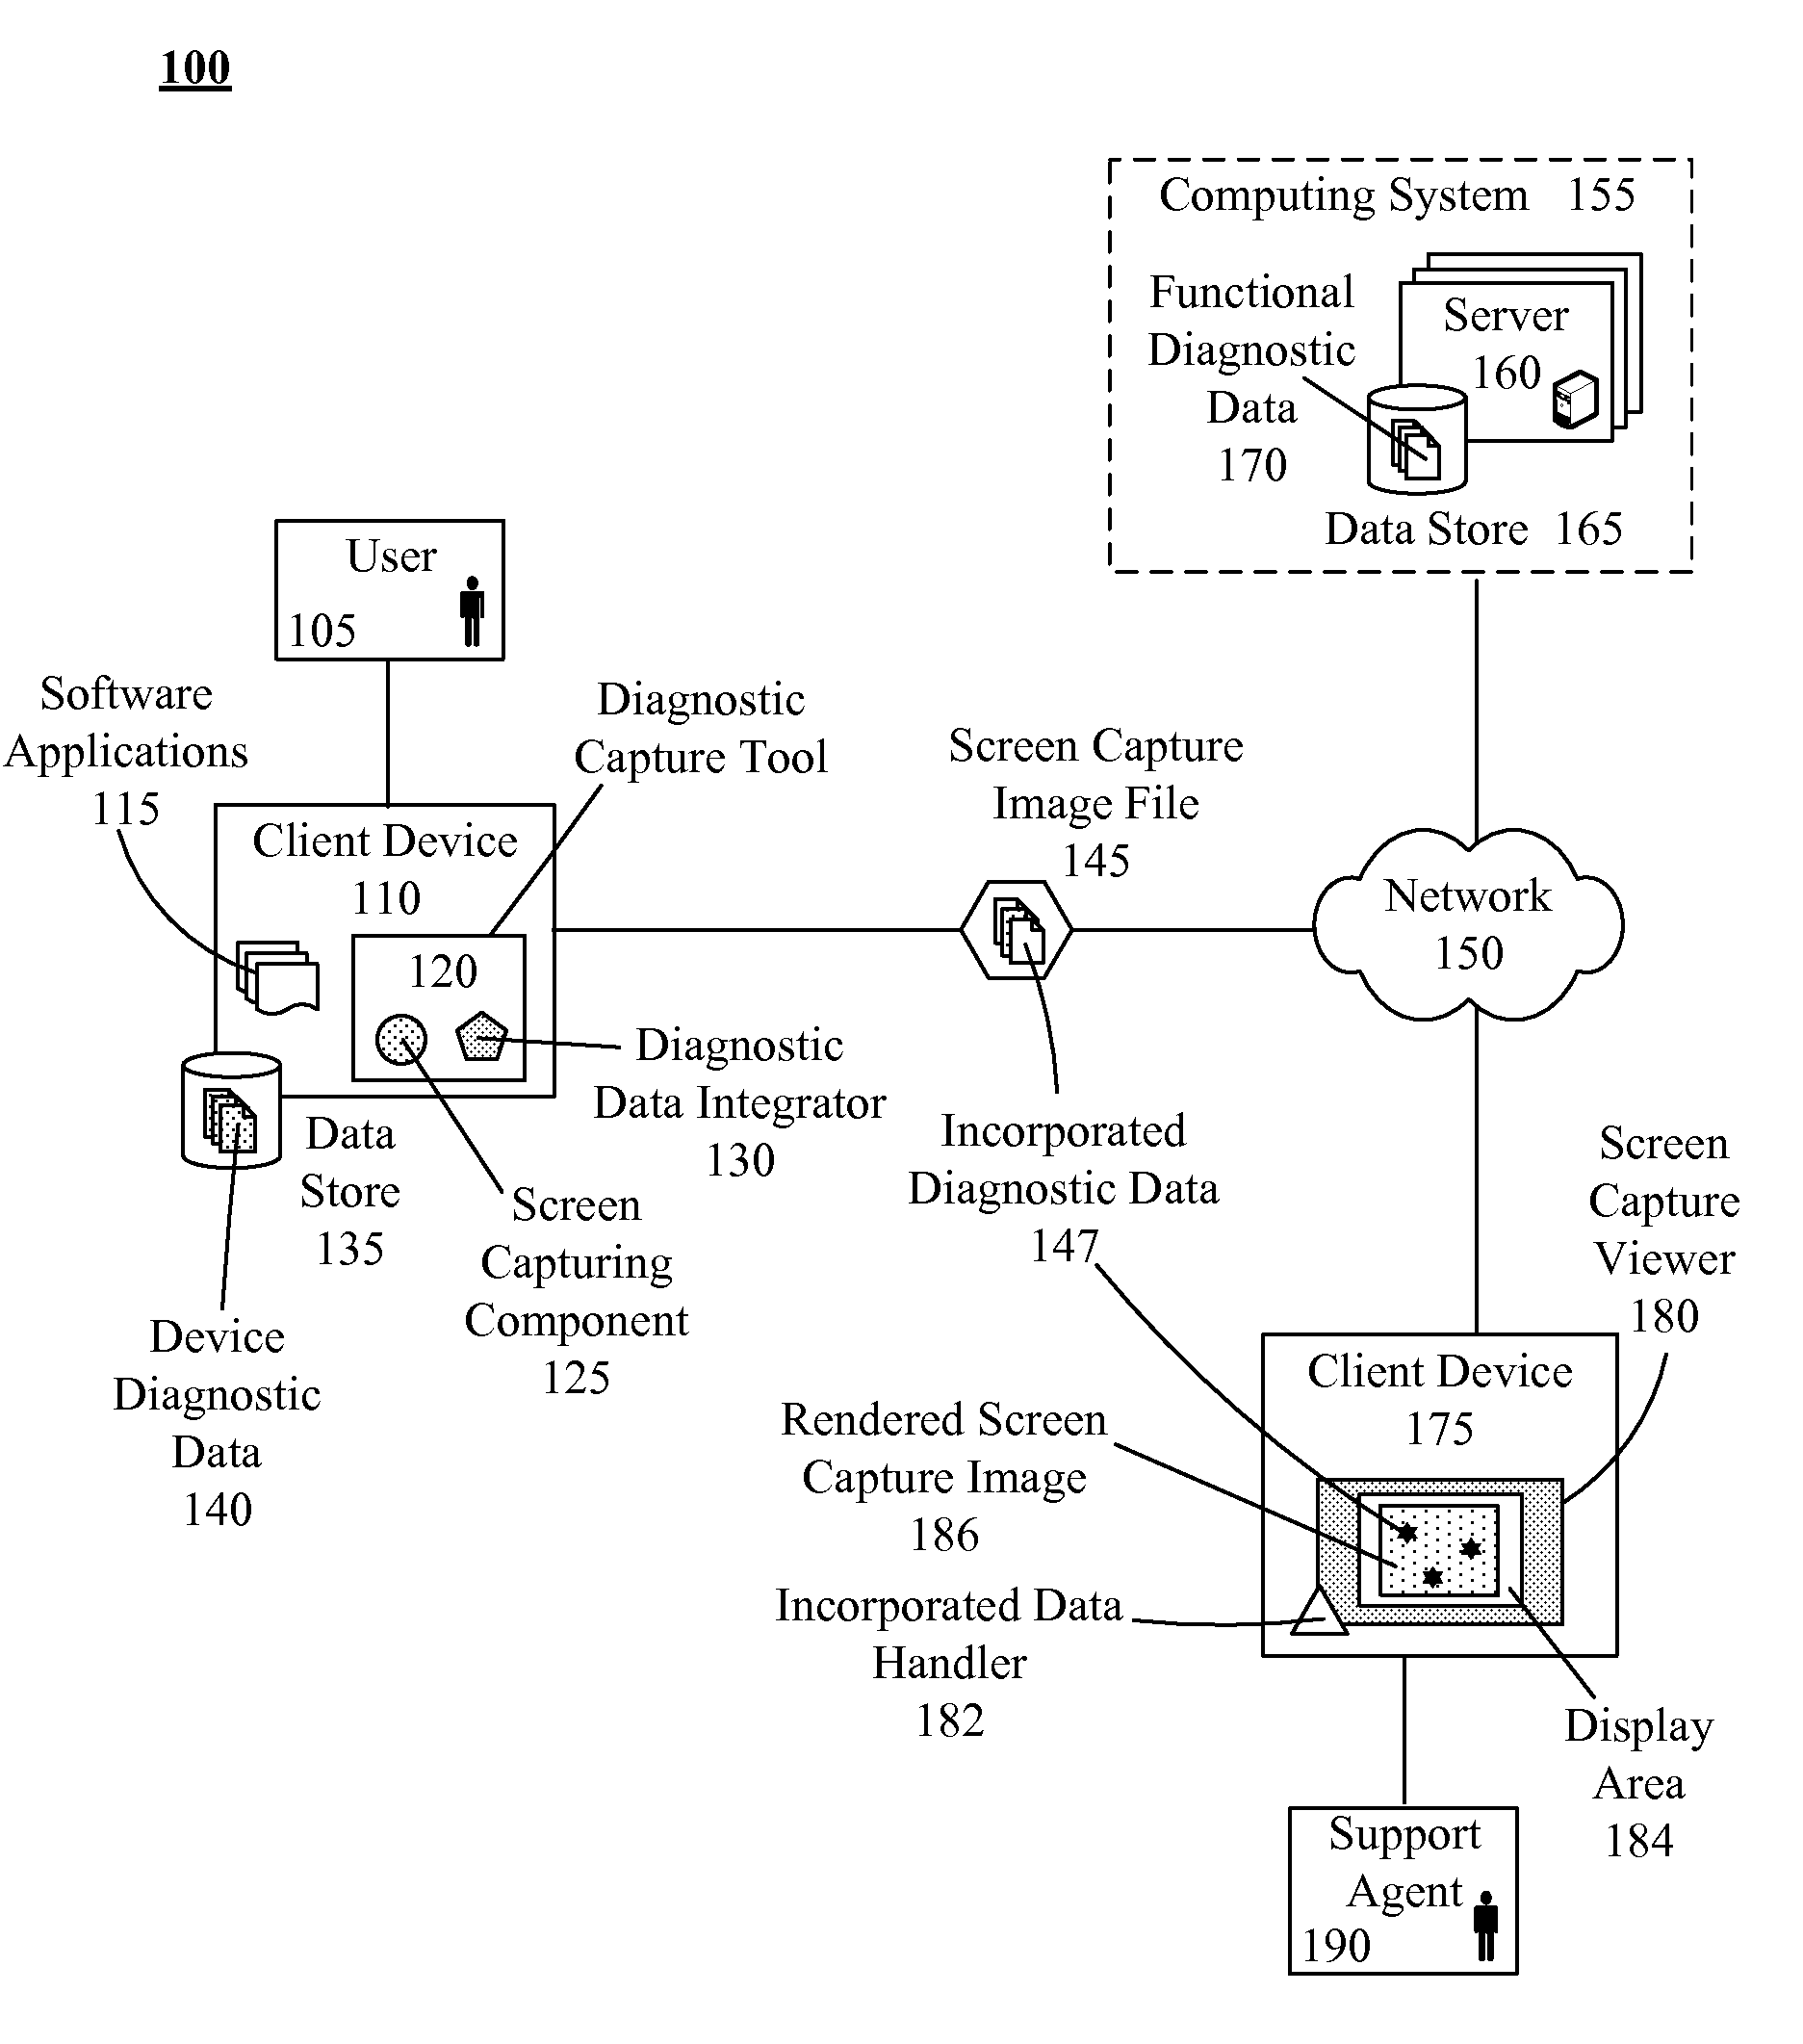 Solution for automatically incorporating diagnostic data within screen capture images